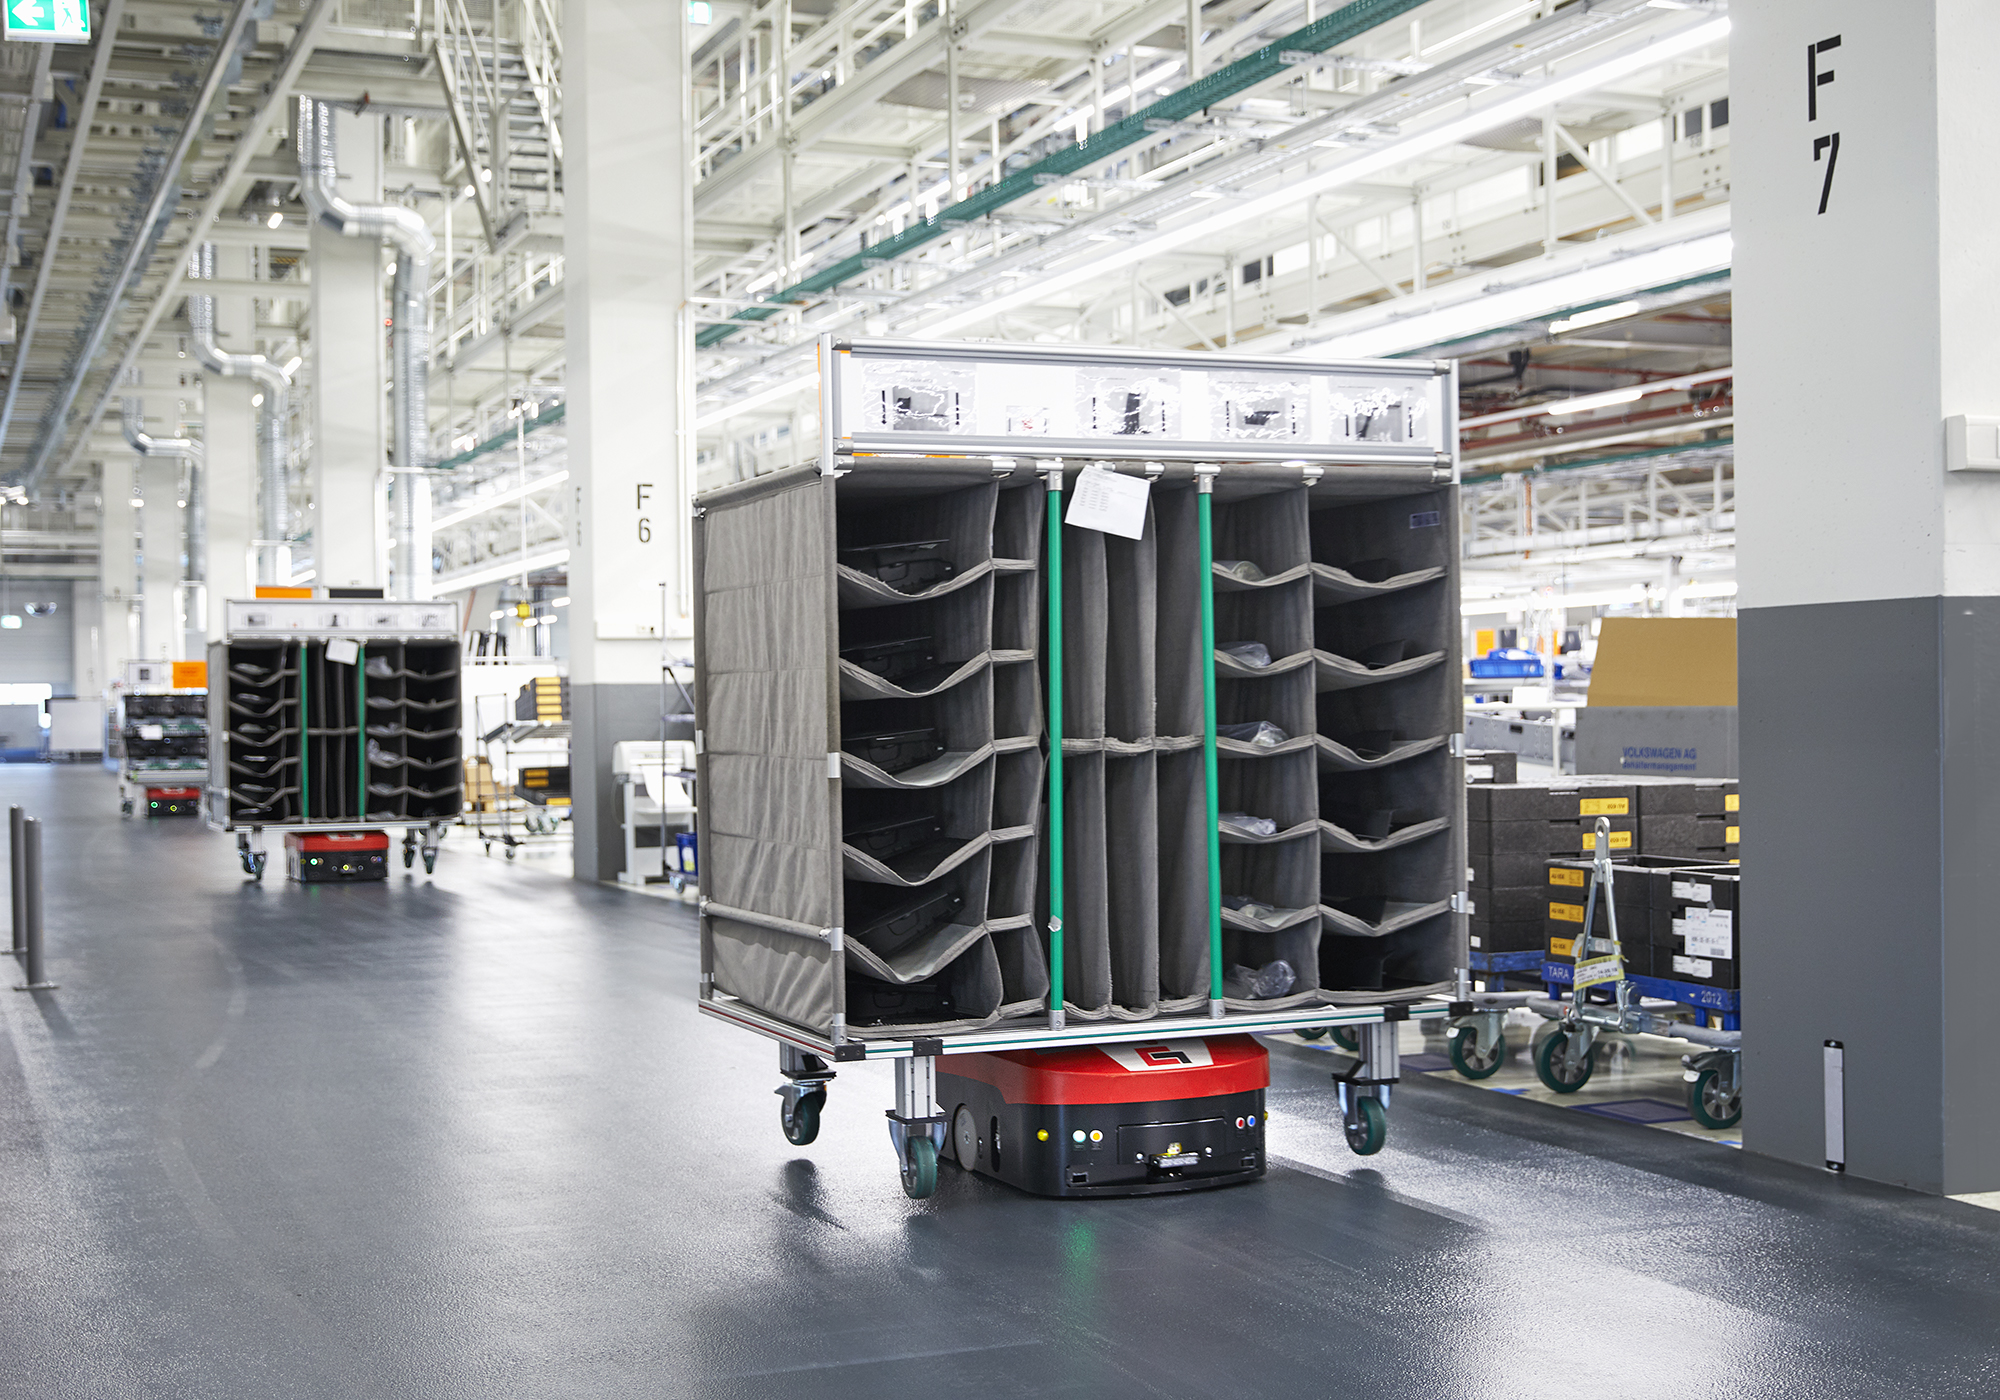 Automated Guided Vehicles ensure an efficient material flow